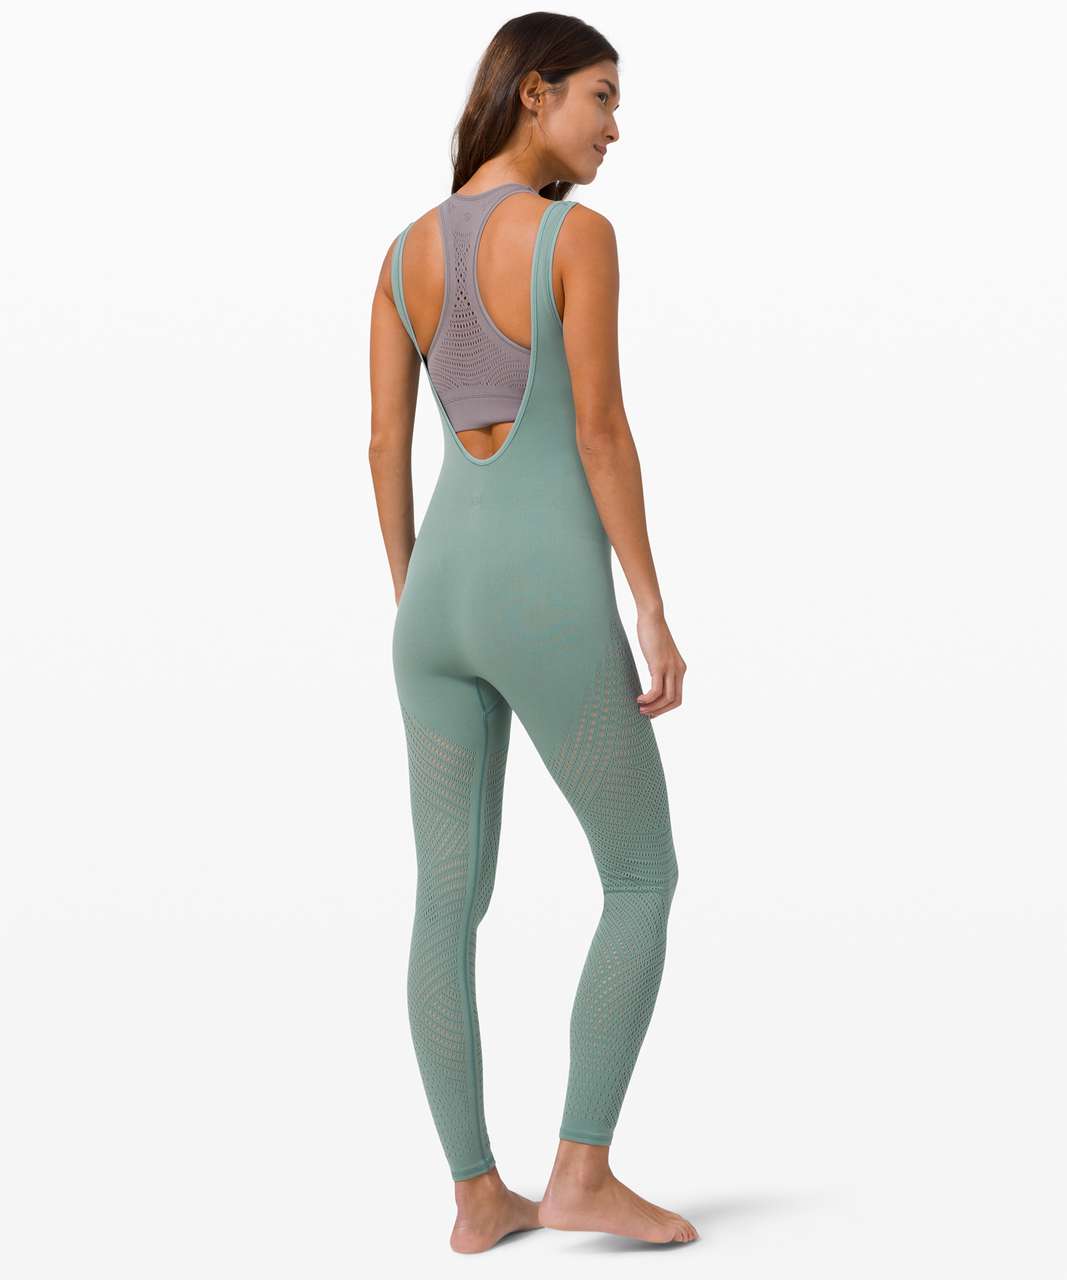 Here she is: the elusive Reveal Onesie in Digi Rain (4) which was on sale  for the price of two scrunchies : r/lululemon